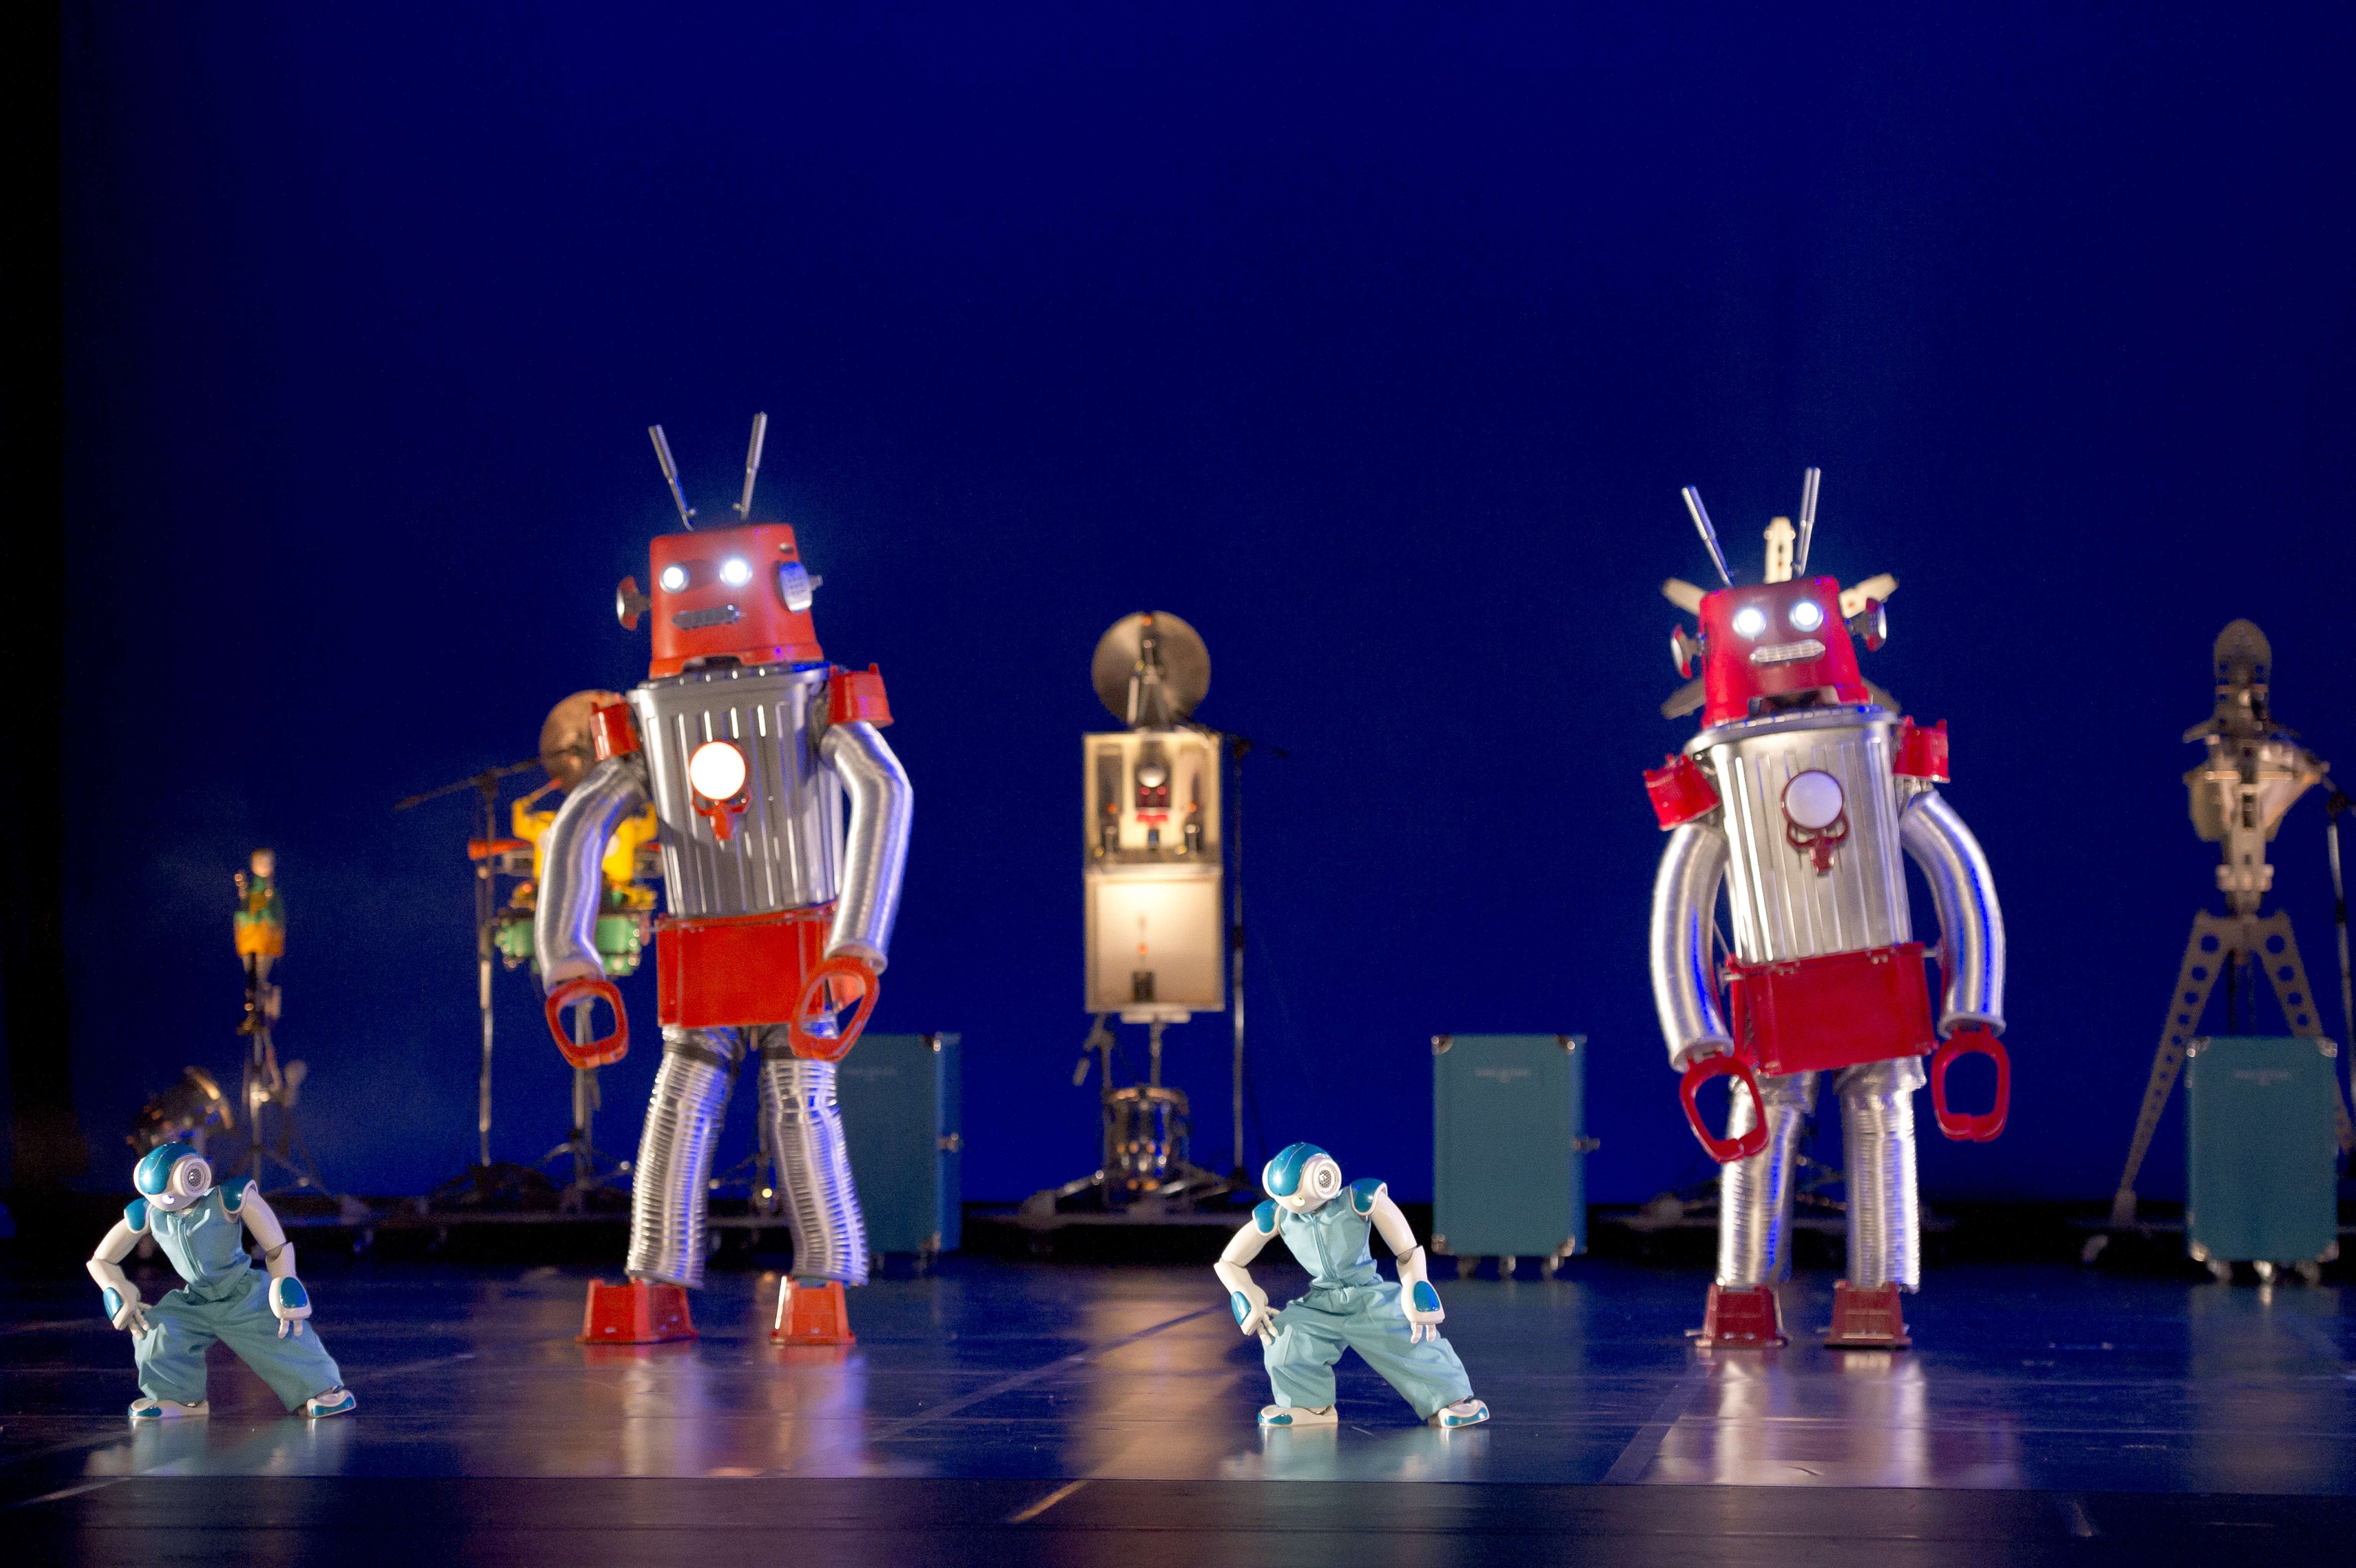 Robots and humans interact in Robot, a multimedia dance production by Blanca Li Dance Company. Photo: Laurent Philippe